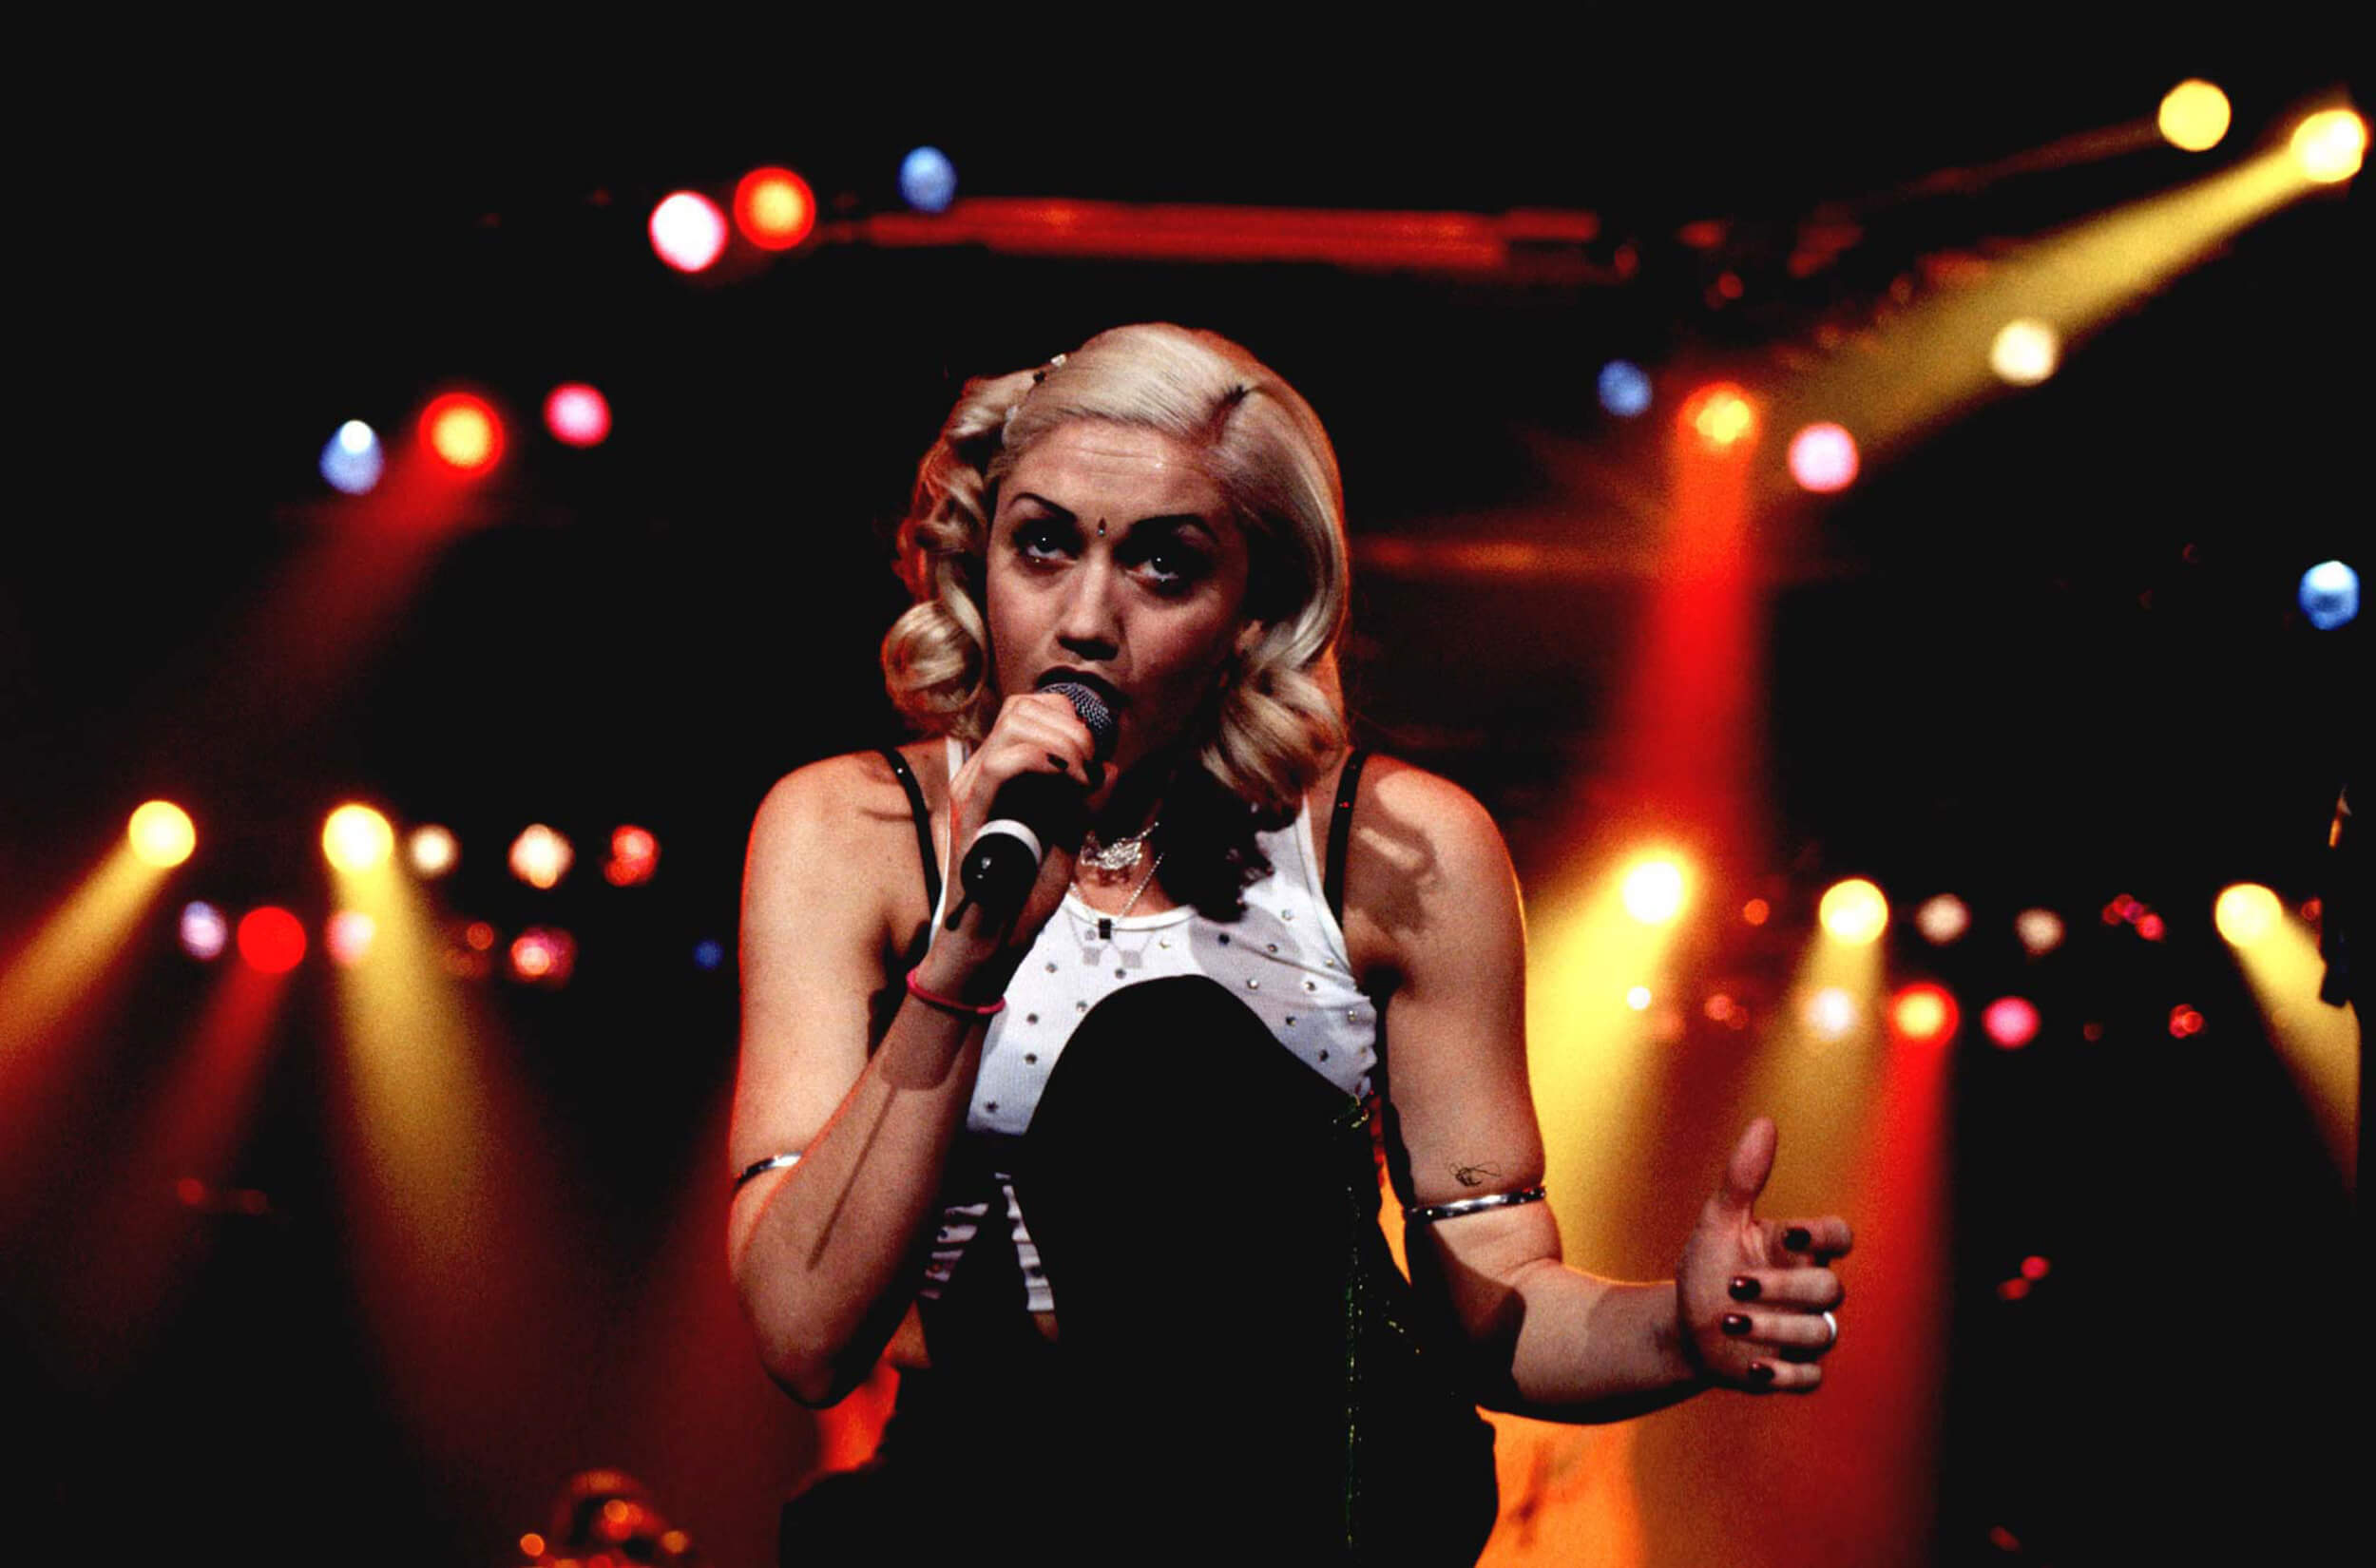 Gwen Stefani kneeling on stage while holding a microphone to her mouth in 1997